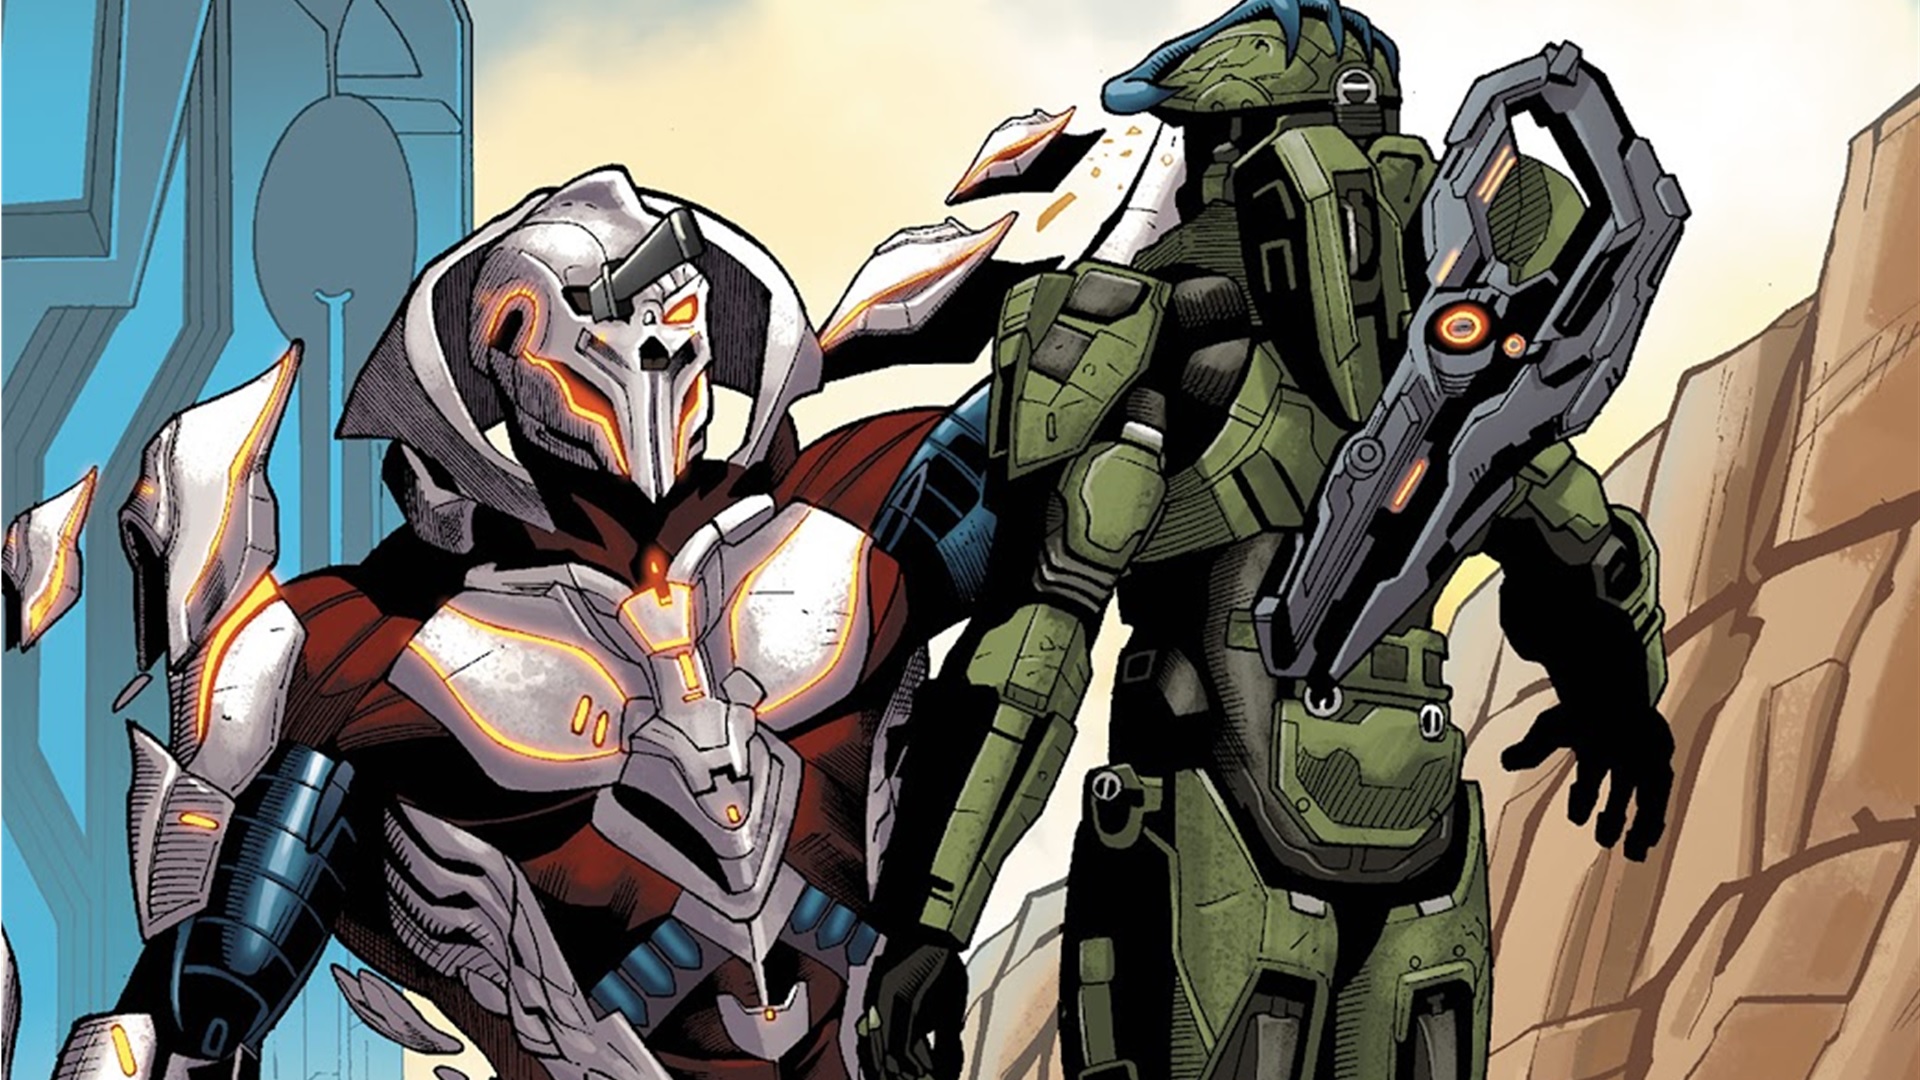 Halo: Escalation panel of the Didact holding the Master Chief aloft after the Spartan stabbed him in the eye